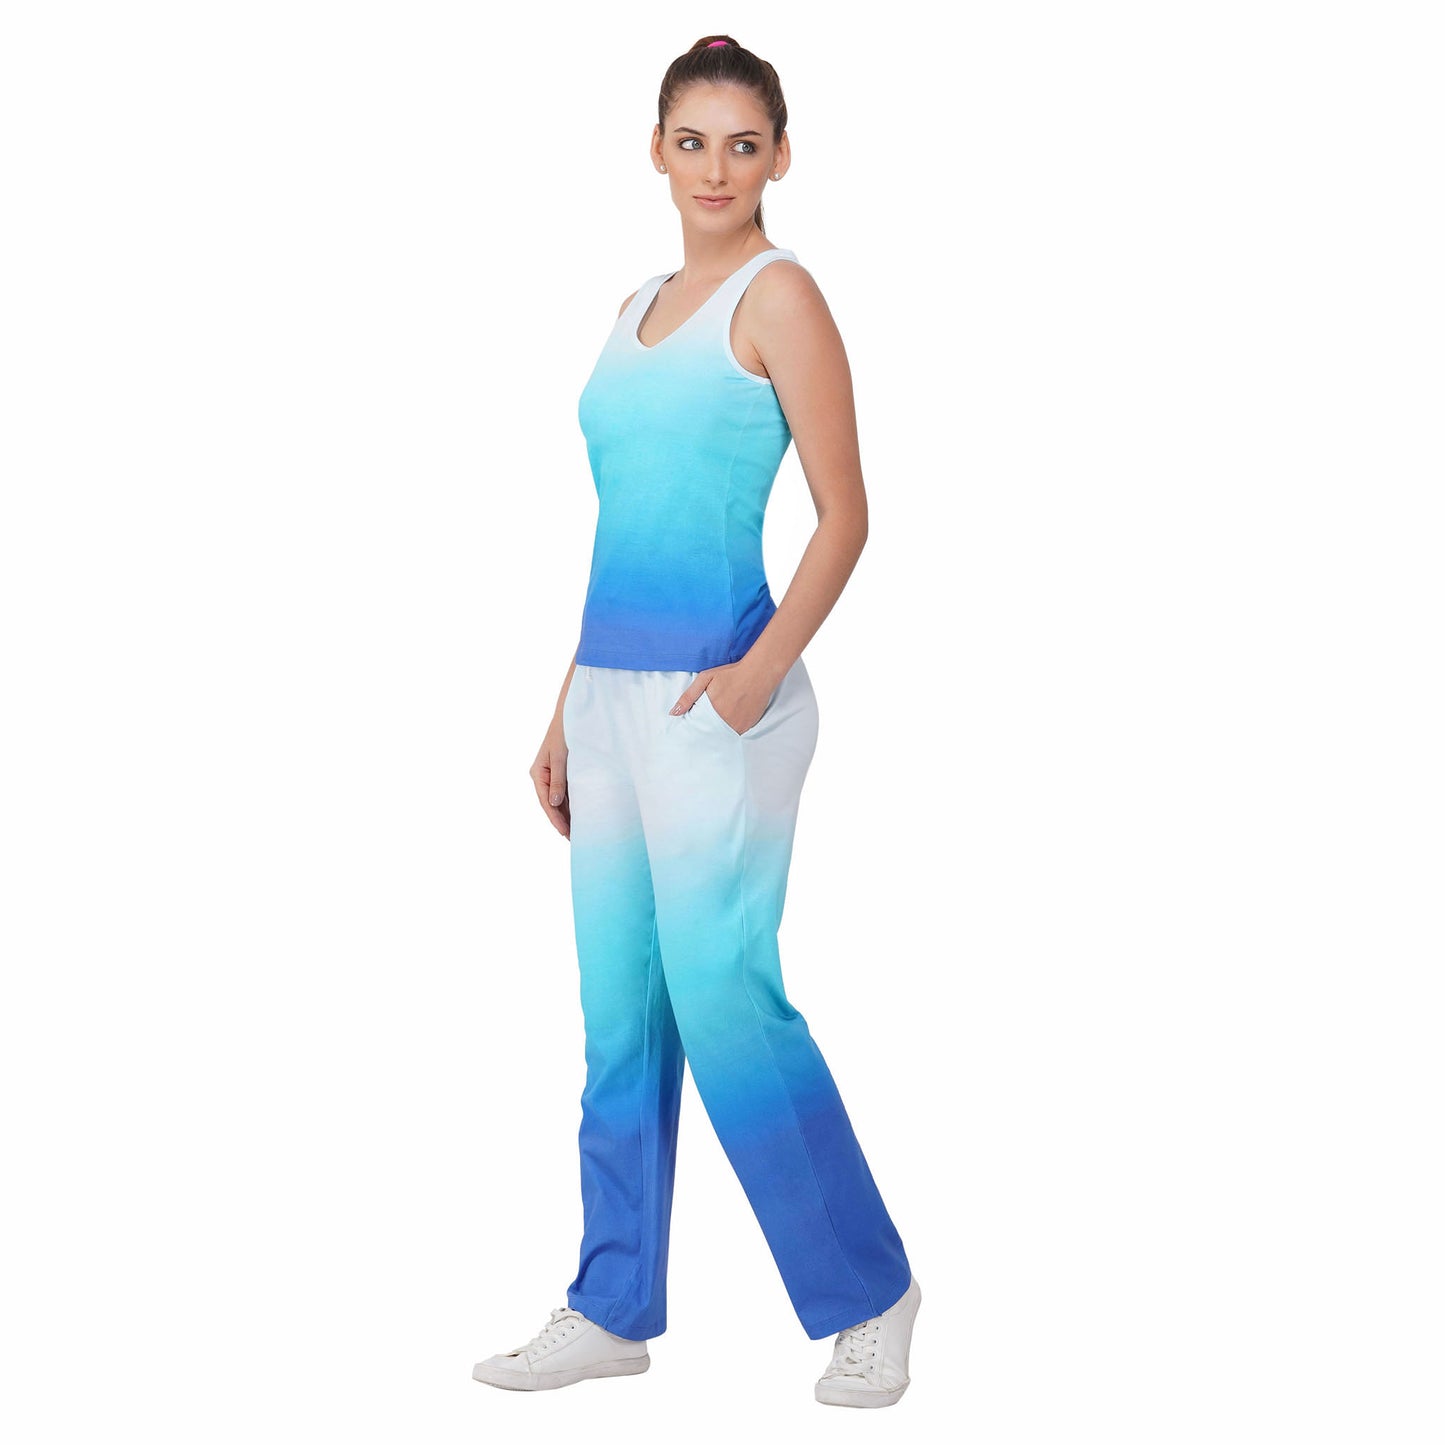 SLAY. Women's White to Blue Ombre Tank Top & Pants Co-ord Set